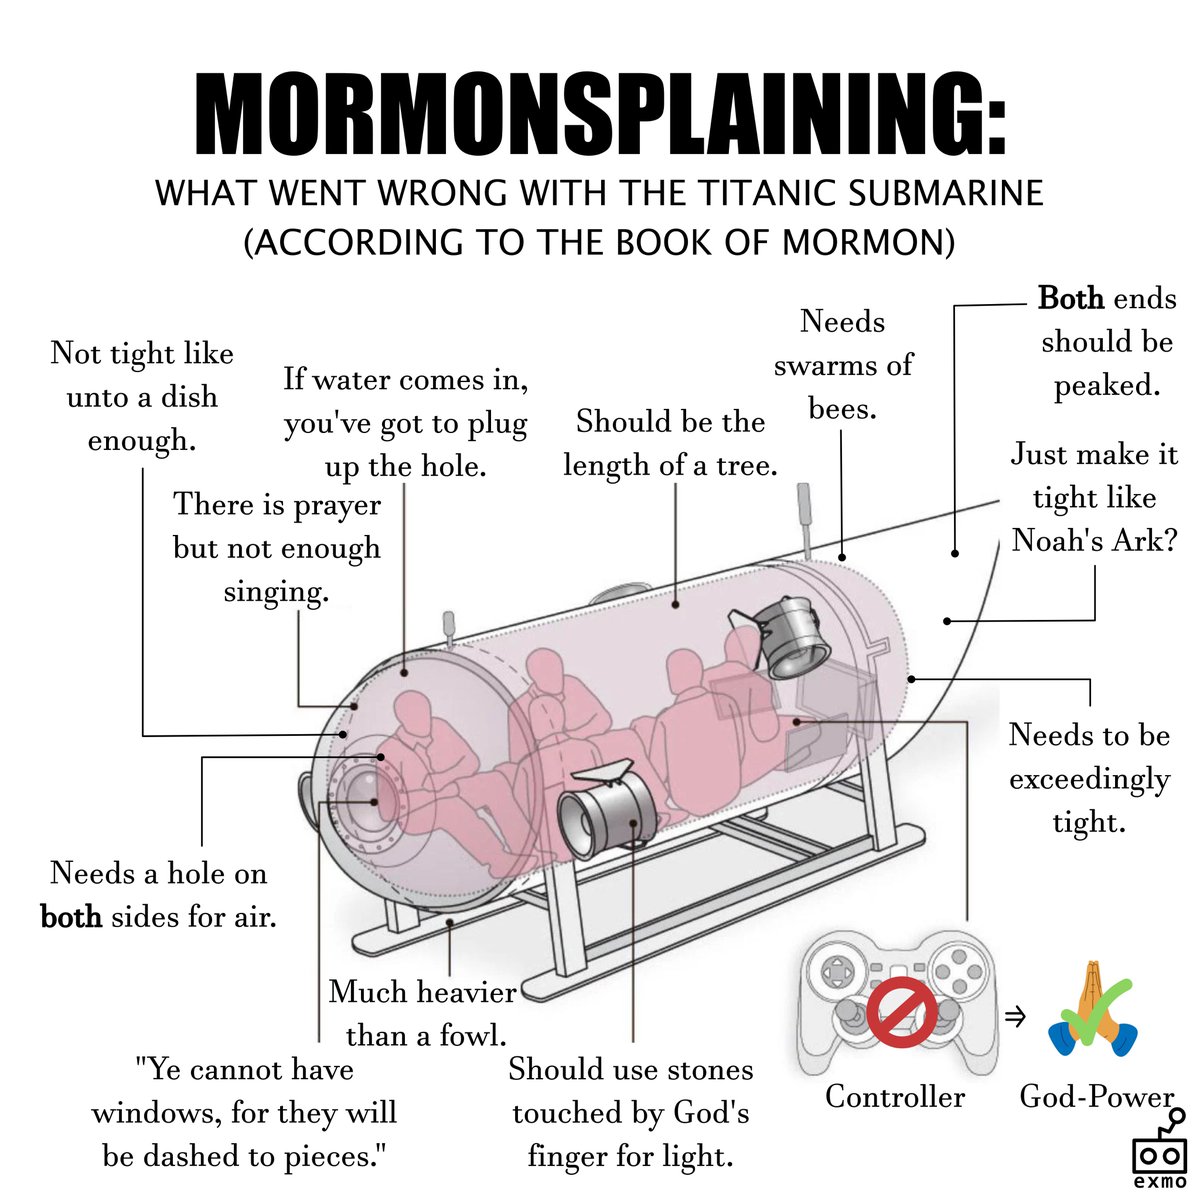 Your daily #Mormon image.